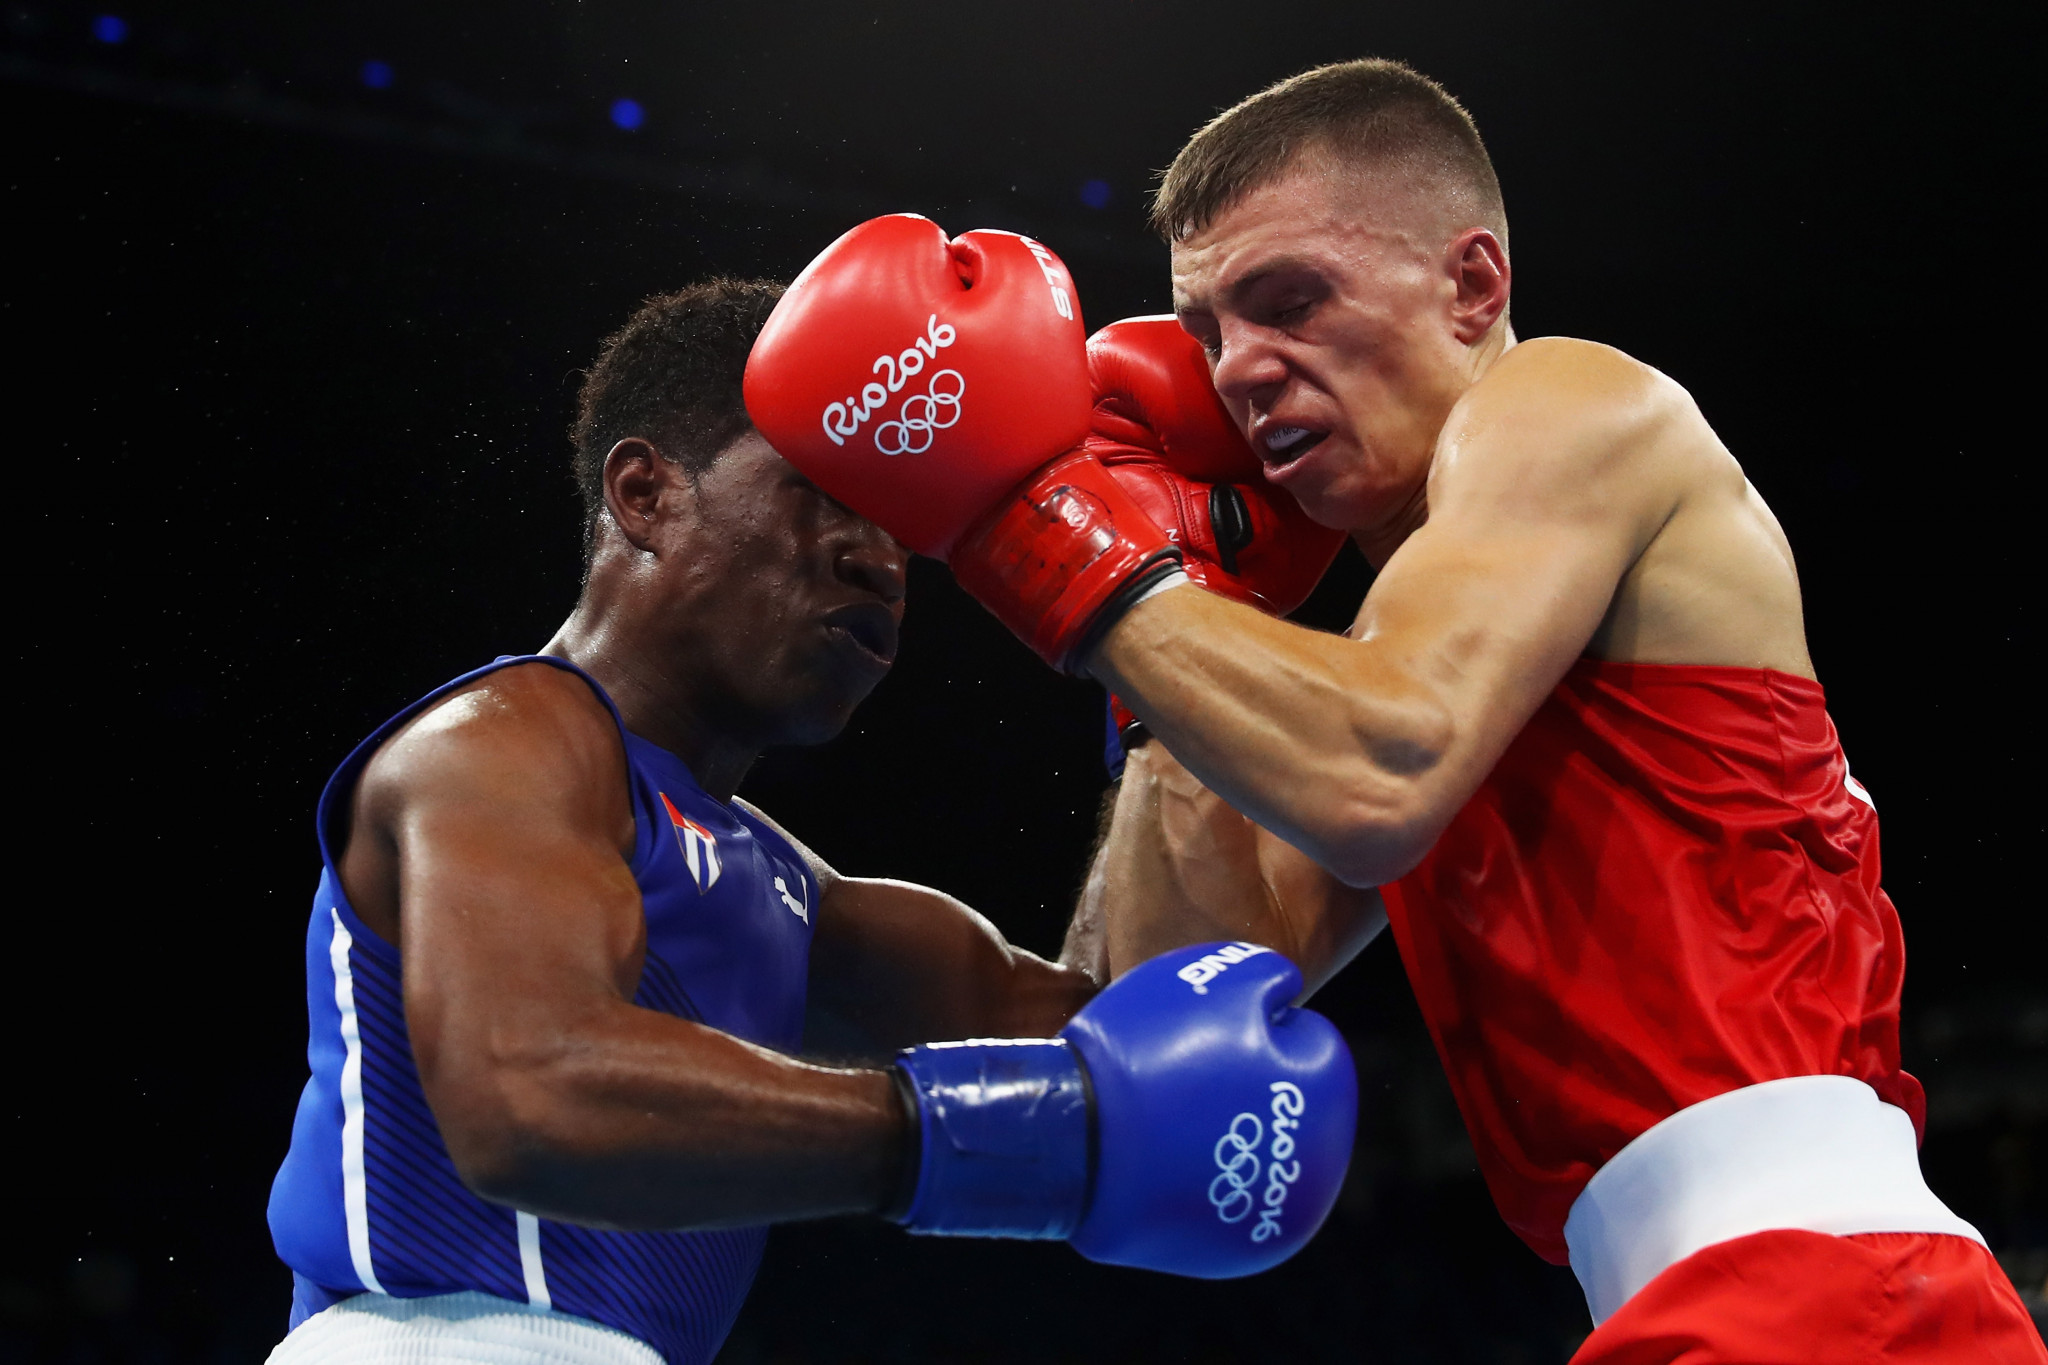 Boxing's Olympic status remains at threat owing to the ongoing governance issues at AIBA ©Getty Images